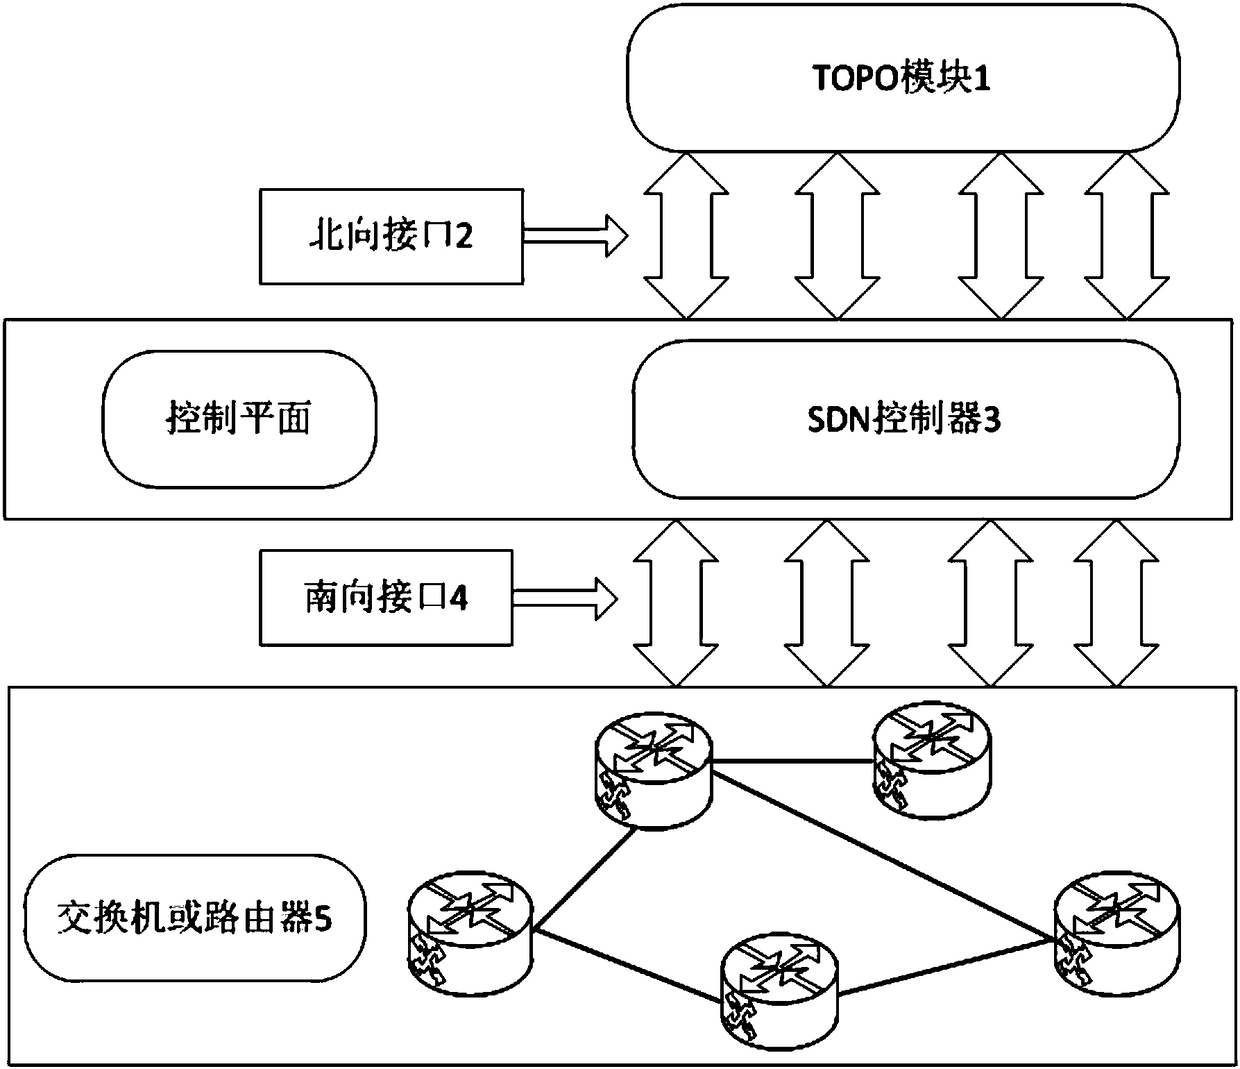 SDN network topology traffic visualization monitoring method and control terminal